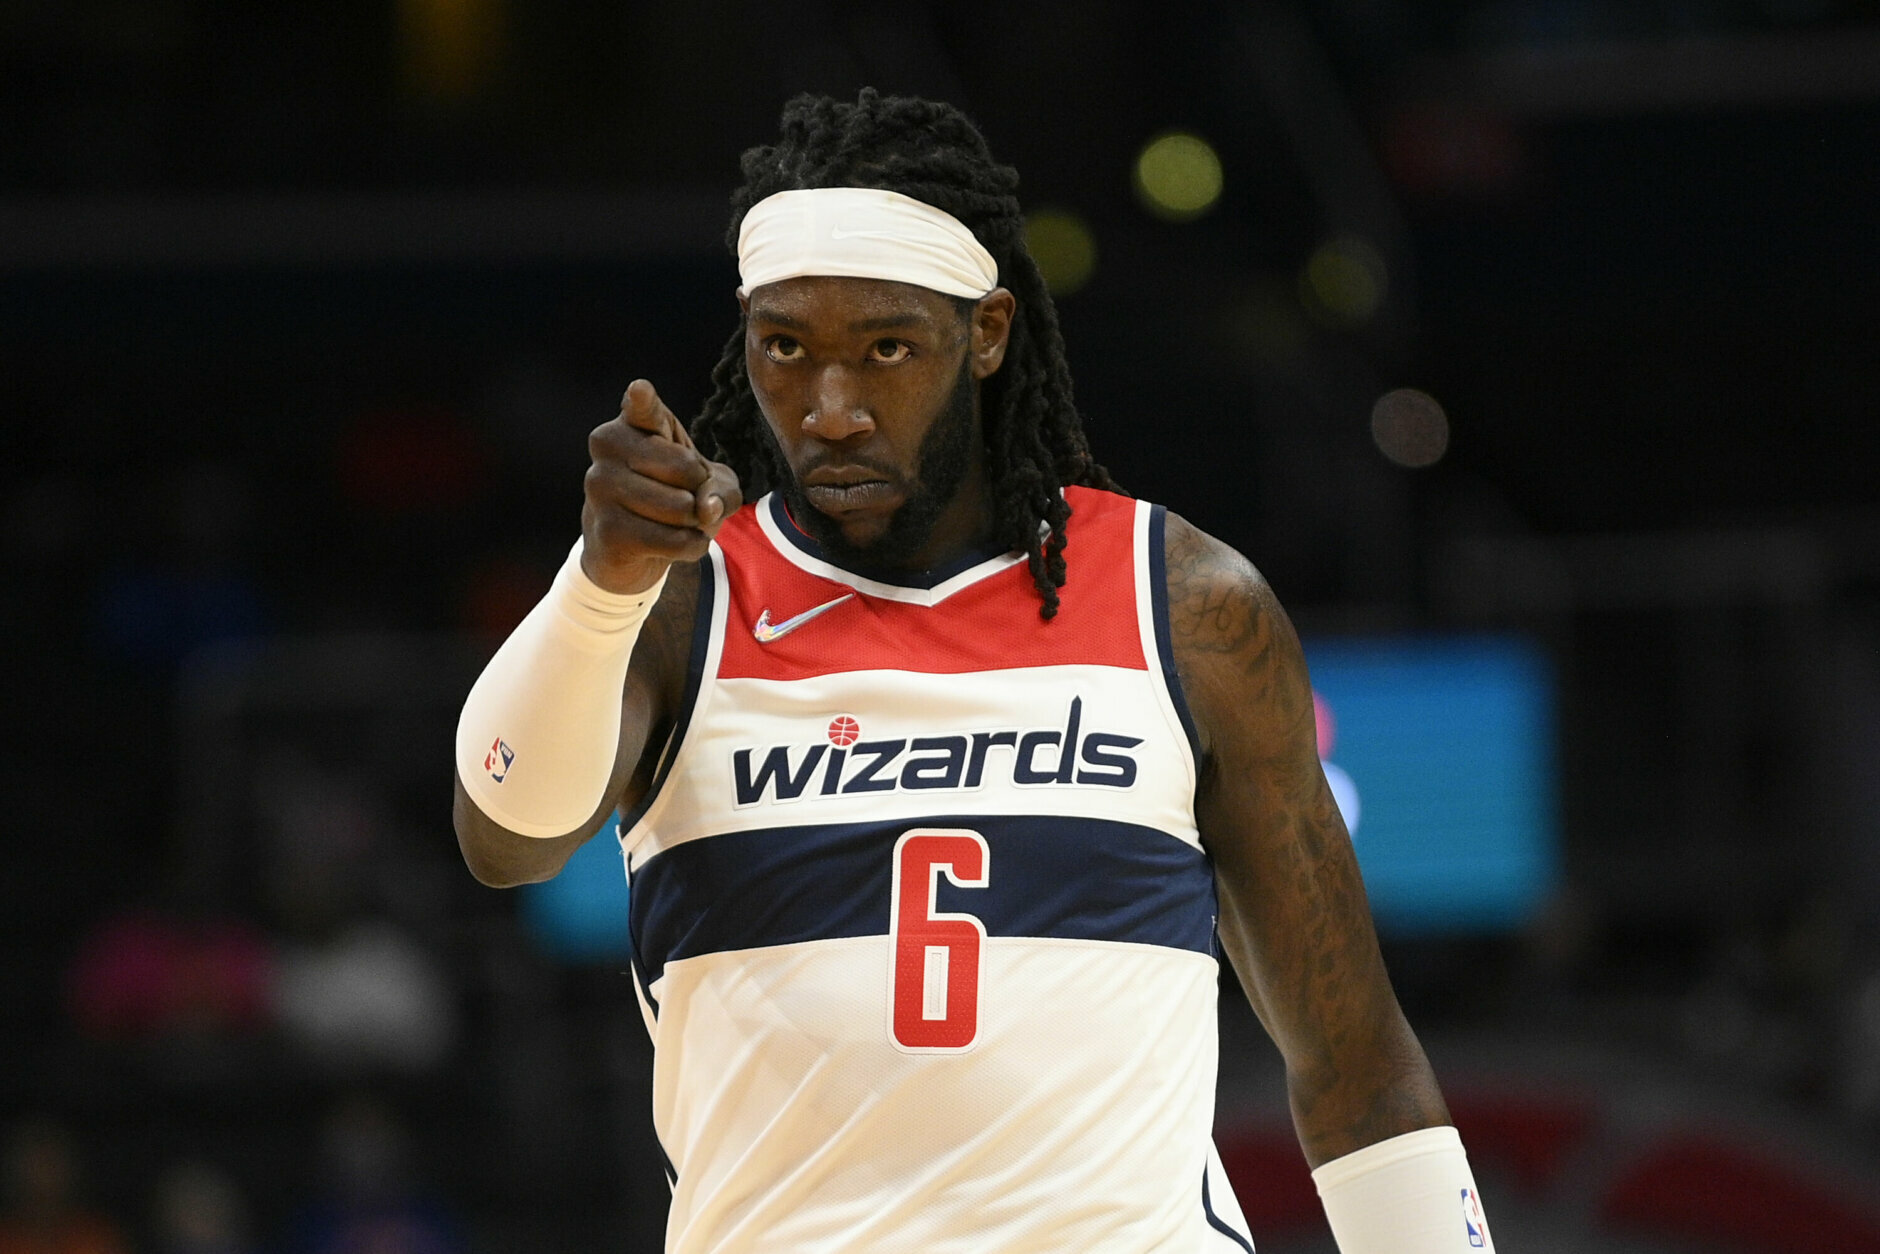 Wizards Preview: New look roster, new head coach, same goals